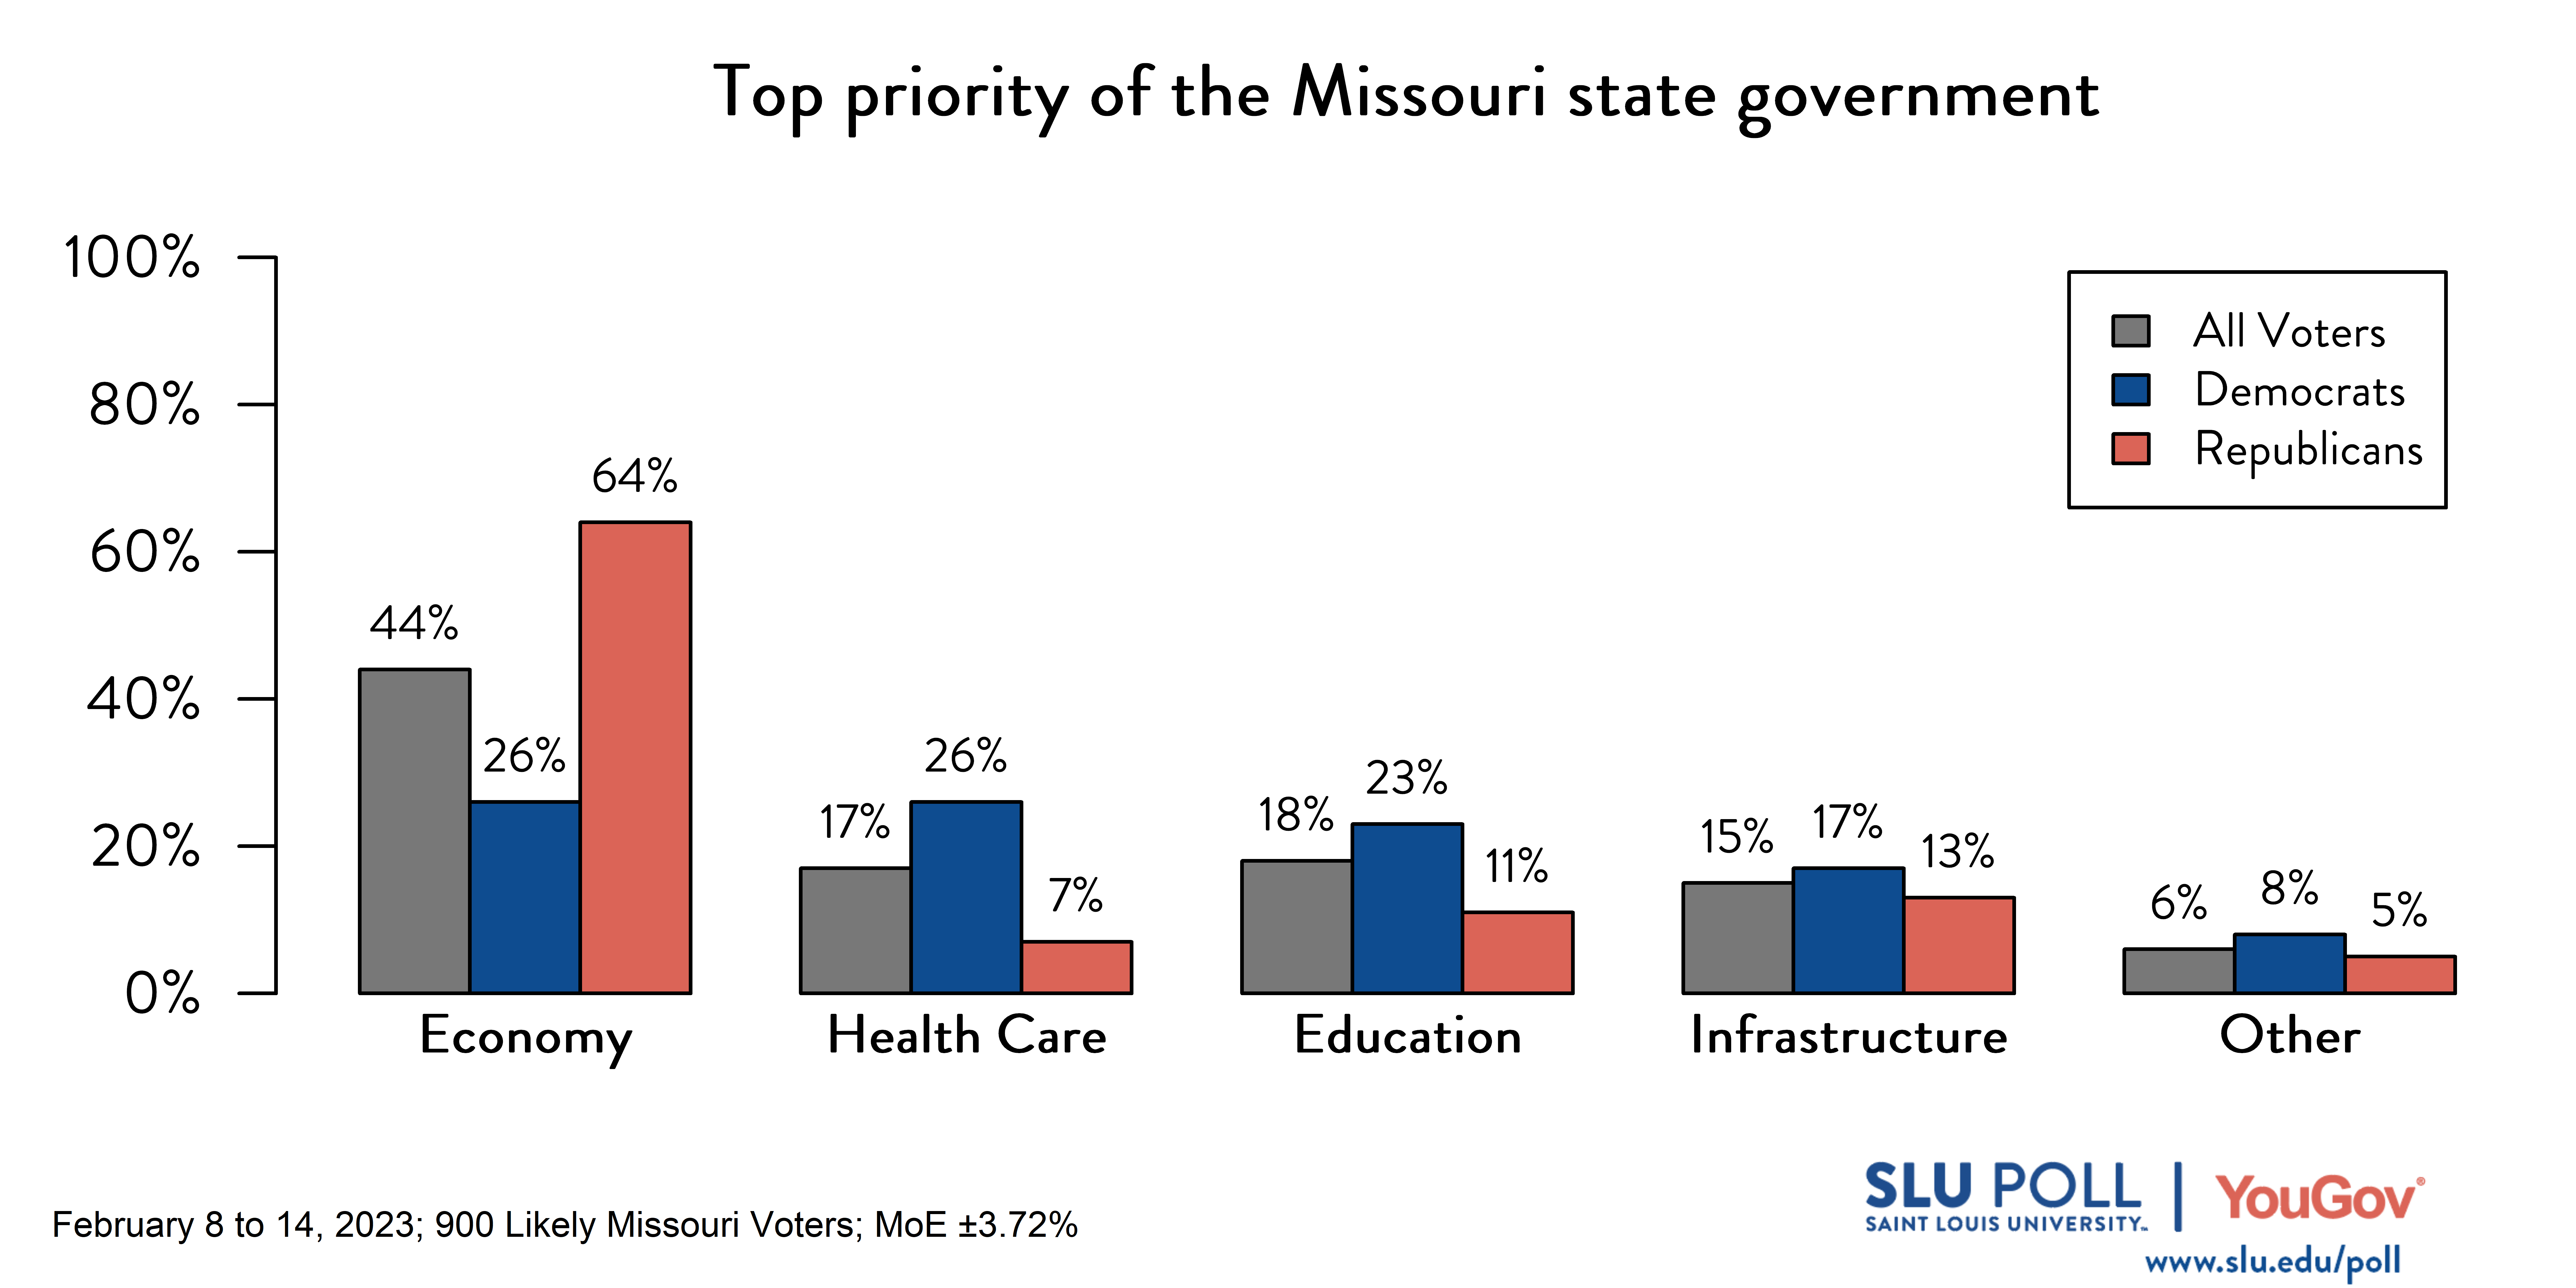 Likely voters' responses to 'Which of the following do you think should be the TOP priority of the Missouri state government?': 44% Economy, 17% Health care, 18% Education, 15% Infrastructure, and 6% Other. Democratic voters' responses: ' 26% Economy, 26% Health care, 23% Education, 17% Infrastructure, and 8% Other. Republican voters' responses: 64% Economy, 7% Health care, 11% Education, 13% Infrastructure, and 5% Other.